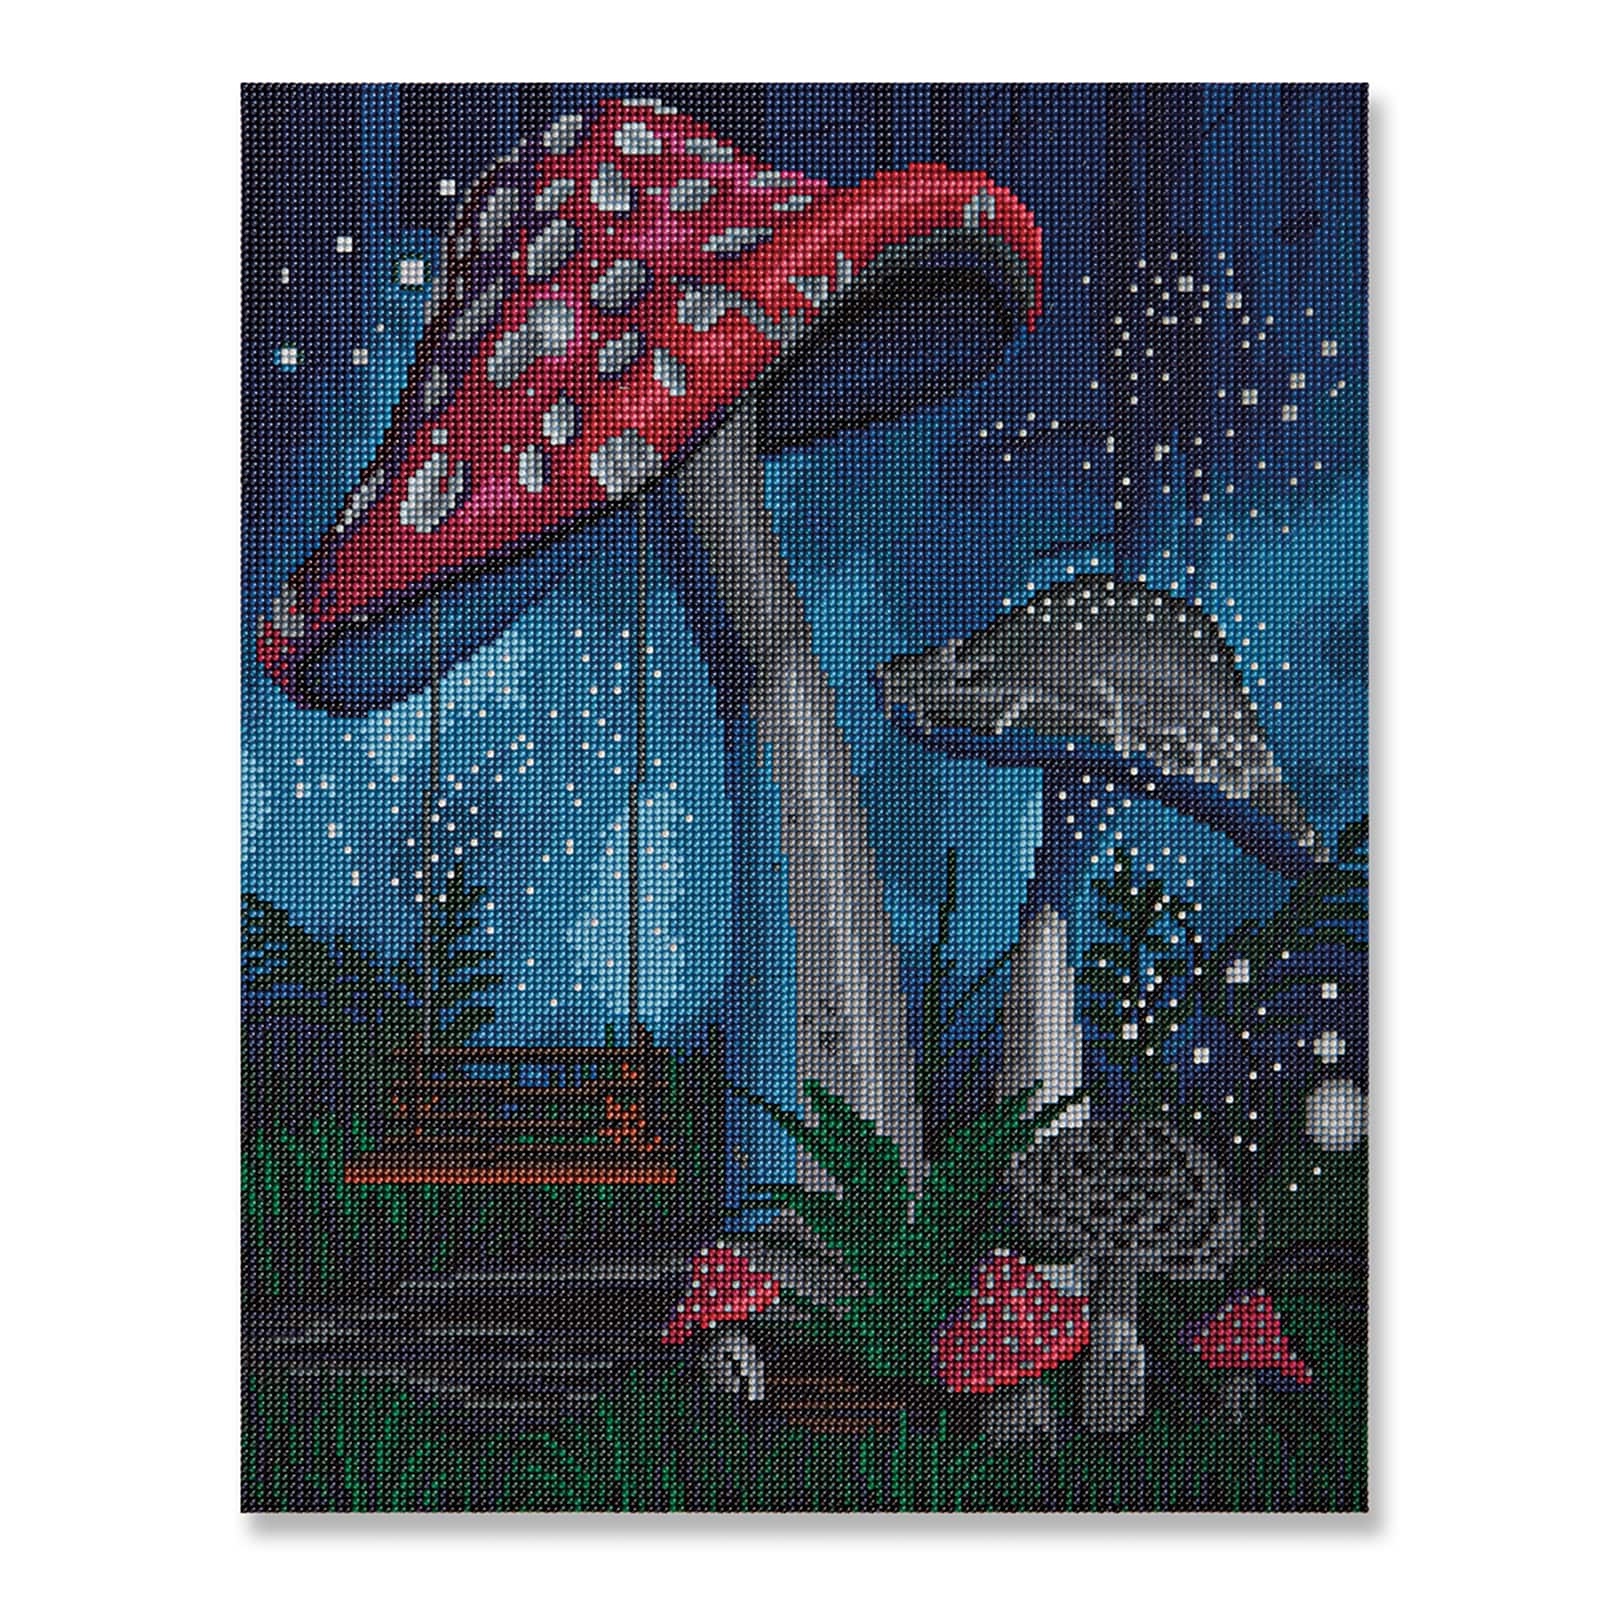 2 Pack Diamond Painting Kits for Adults,5D DIY Mushroom Forest Full Drill  Round Art Gems with Moon Diamond Art Perfect for Home Wall Decor Diamond